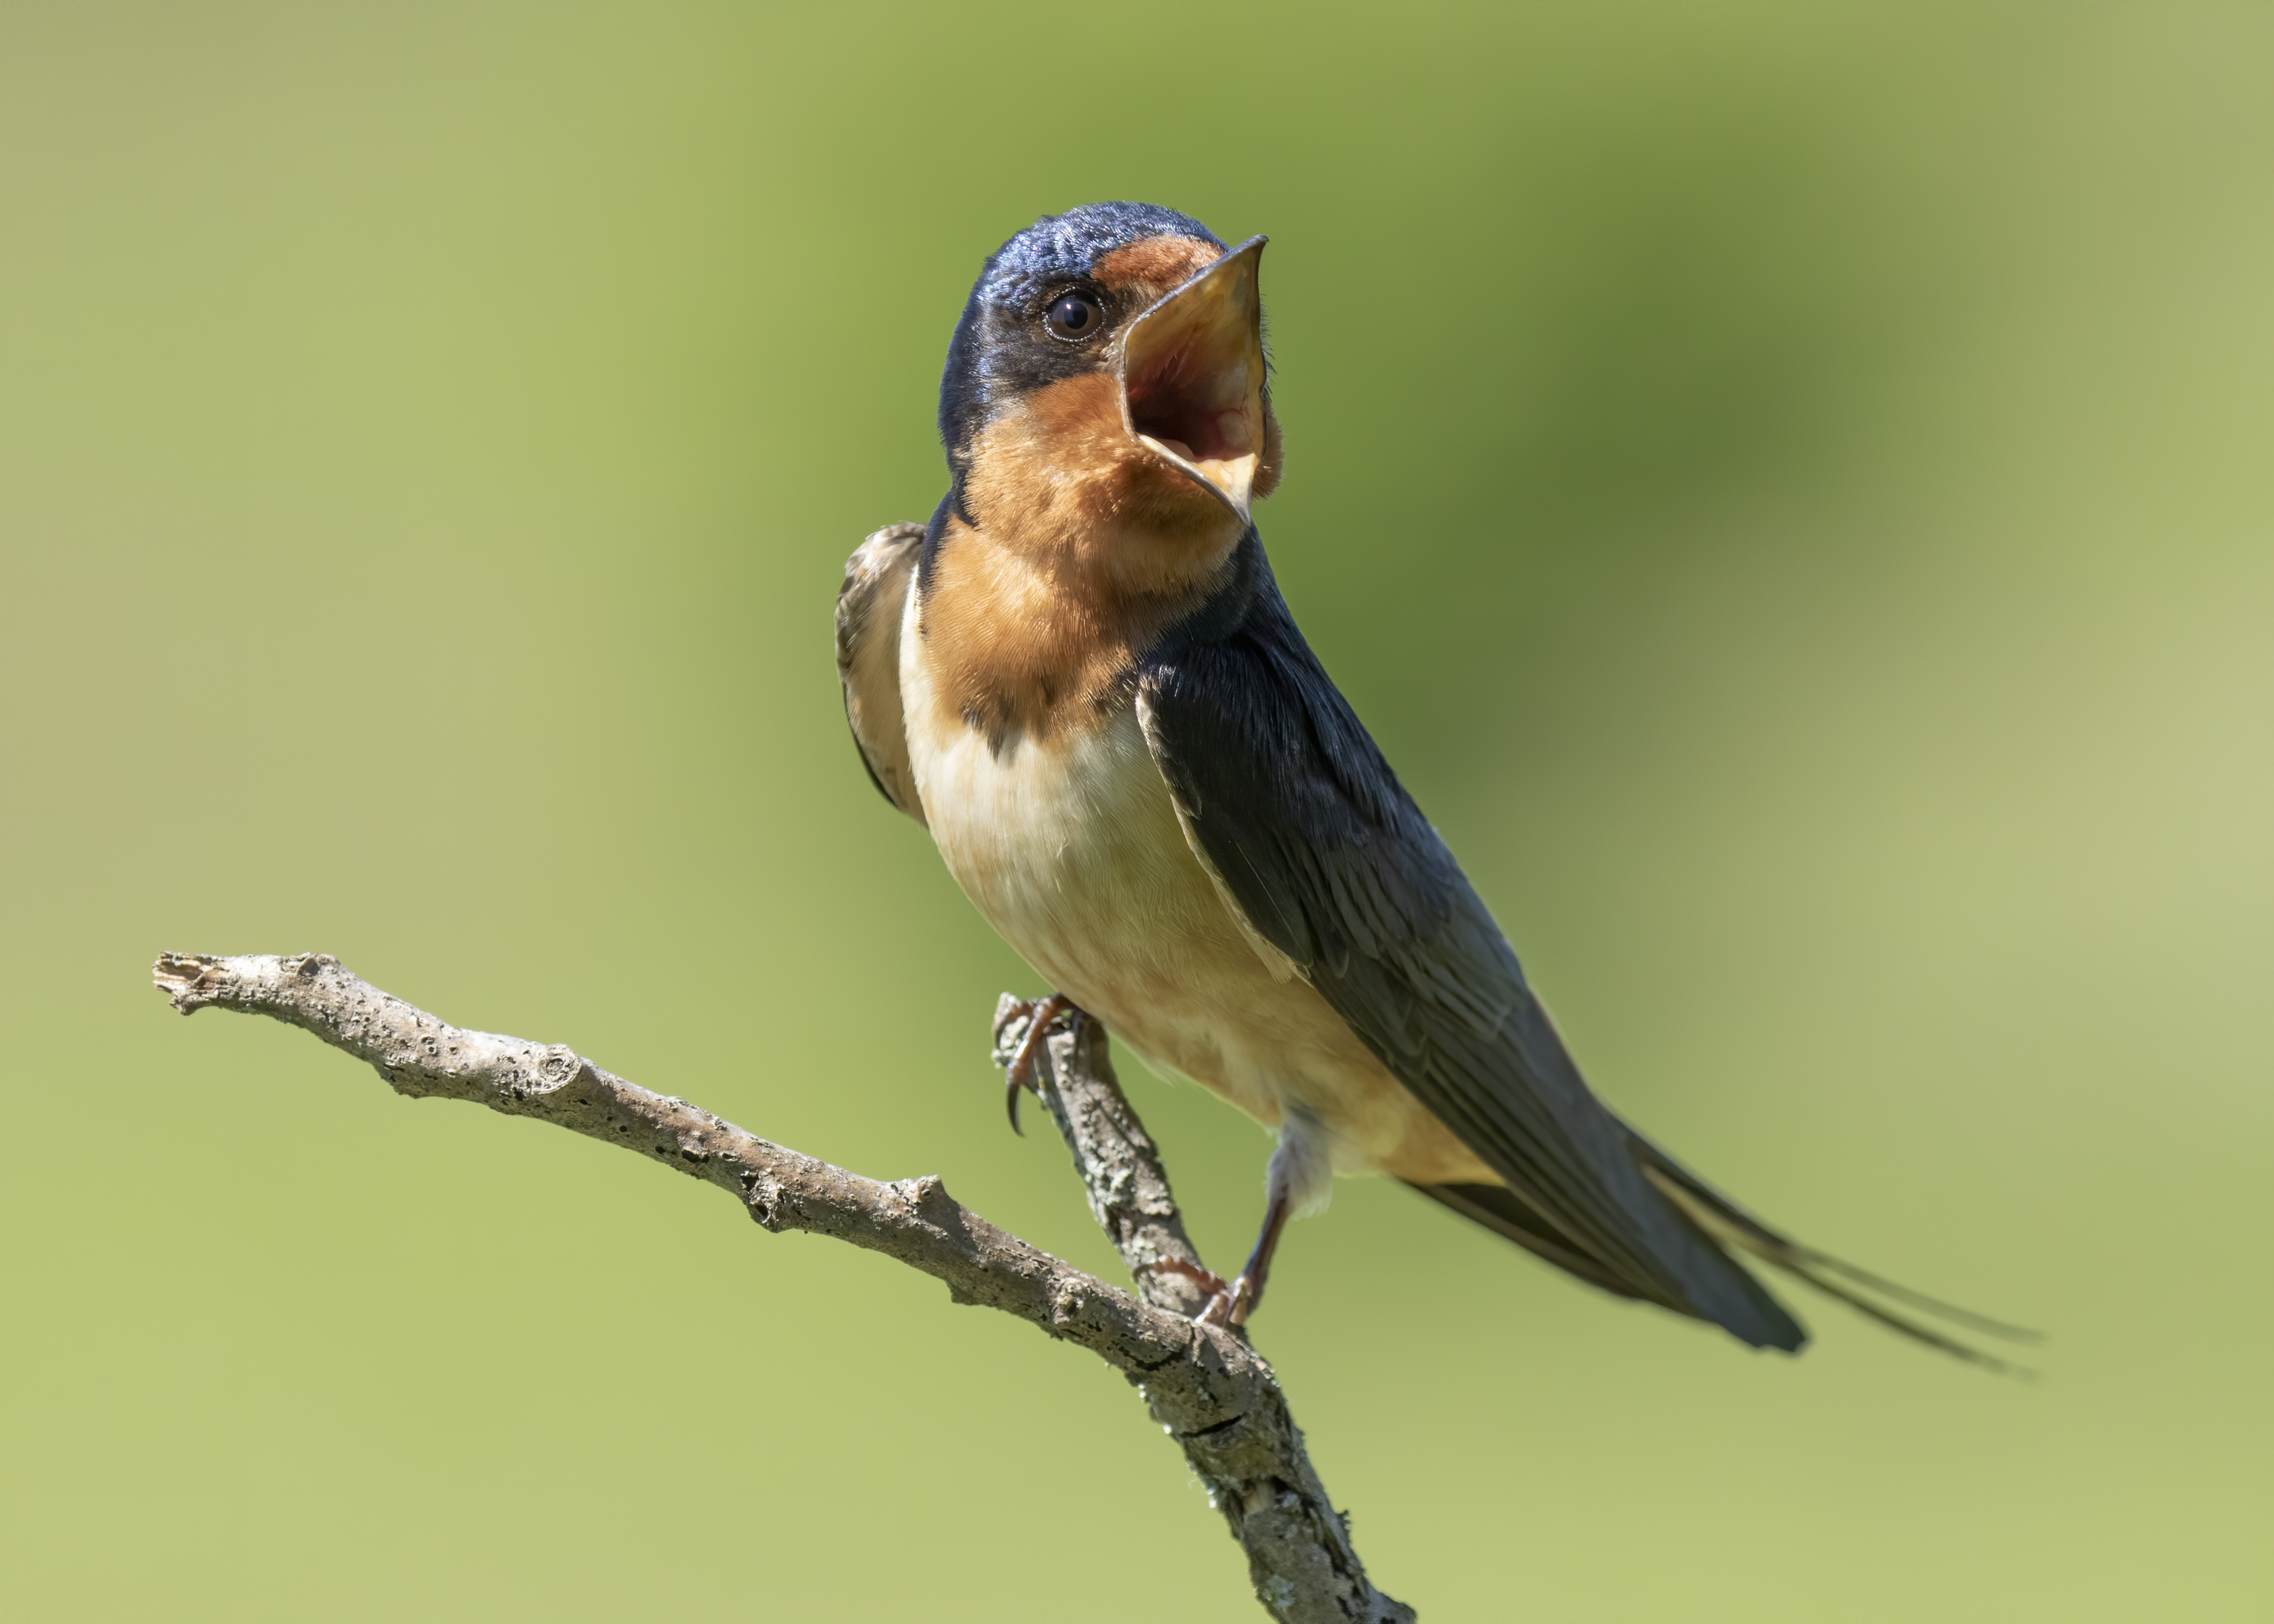 A Barn Swallow sitting on a stick with its mouth wide open.